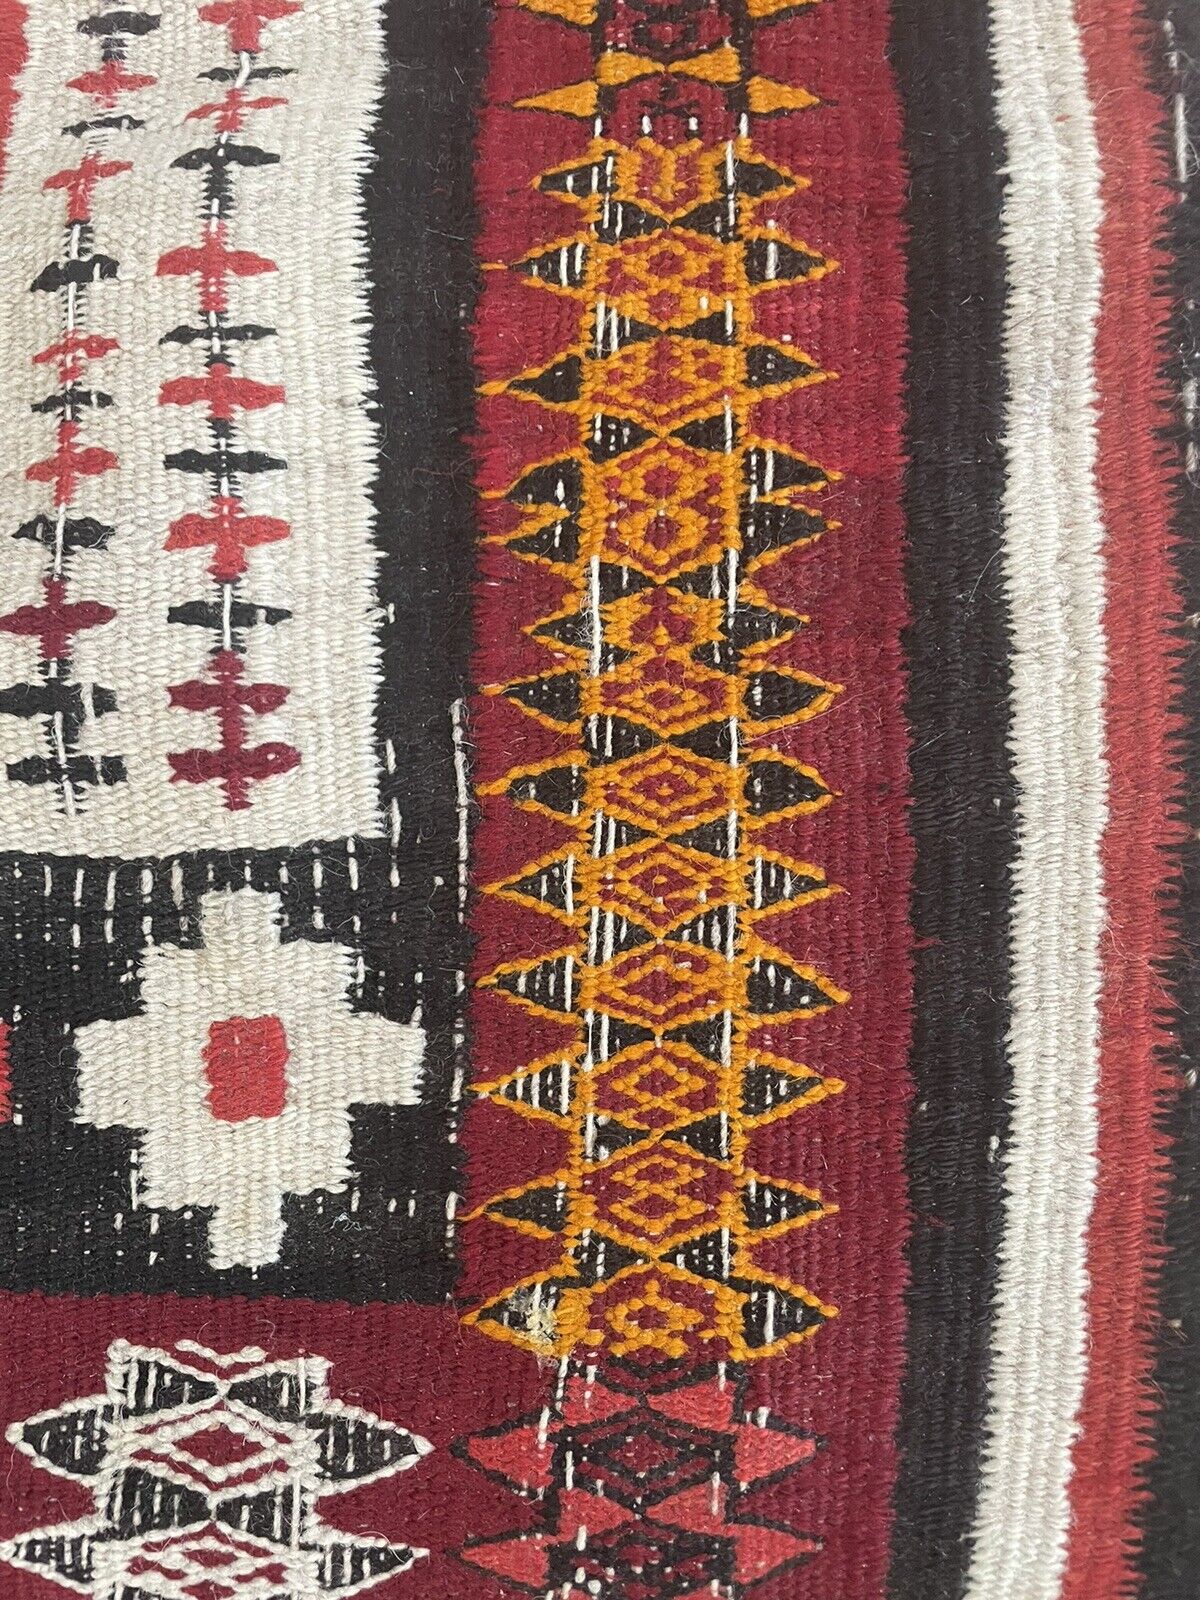 Close-up of geometric shapes on Handmade Antique Moroccan Berber Kilim Rug - Detailed view showcasing the geometric shapes and patterns surrounding the camel motif, creating a harmonious composition.